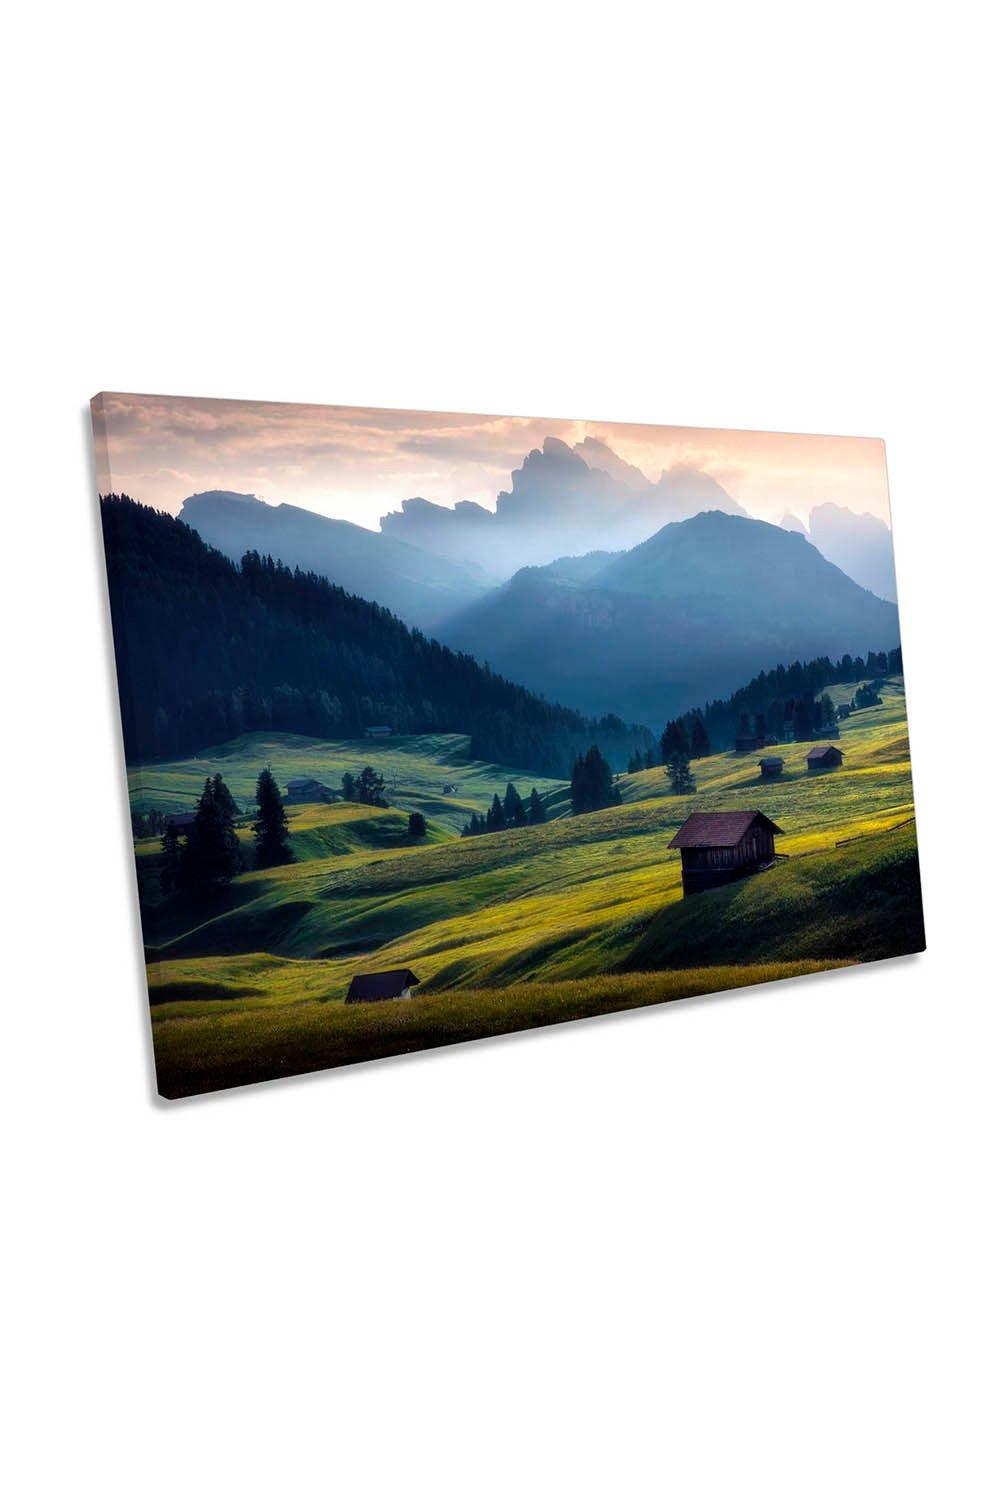 Seister Alm Dolomites Italy Landscape Canvas Wall Art Picture Print